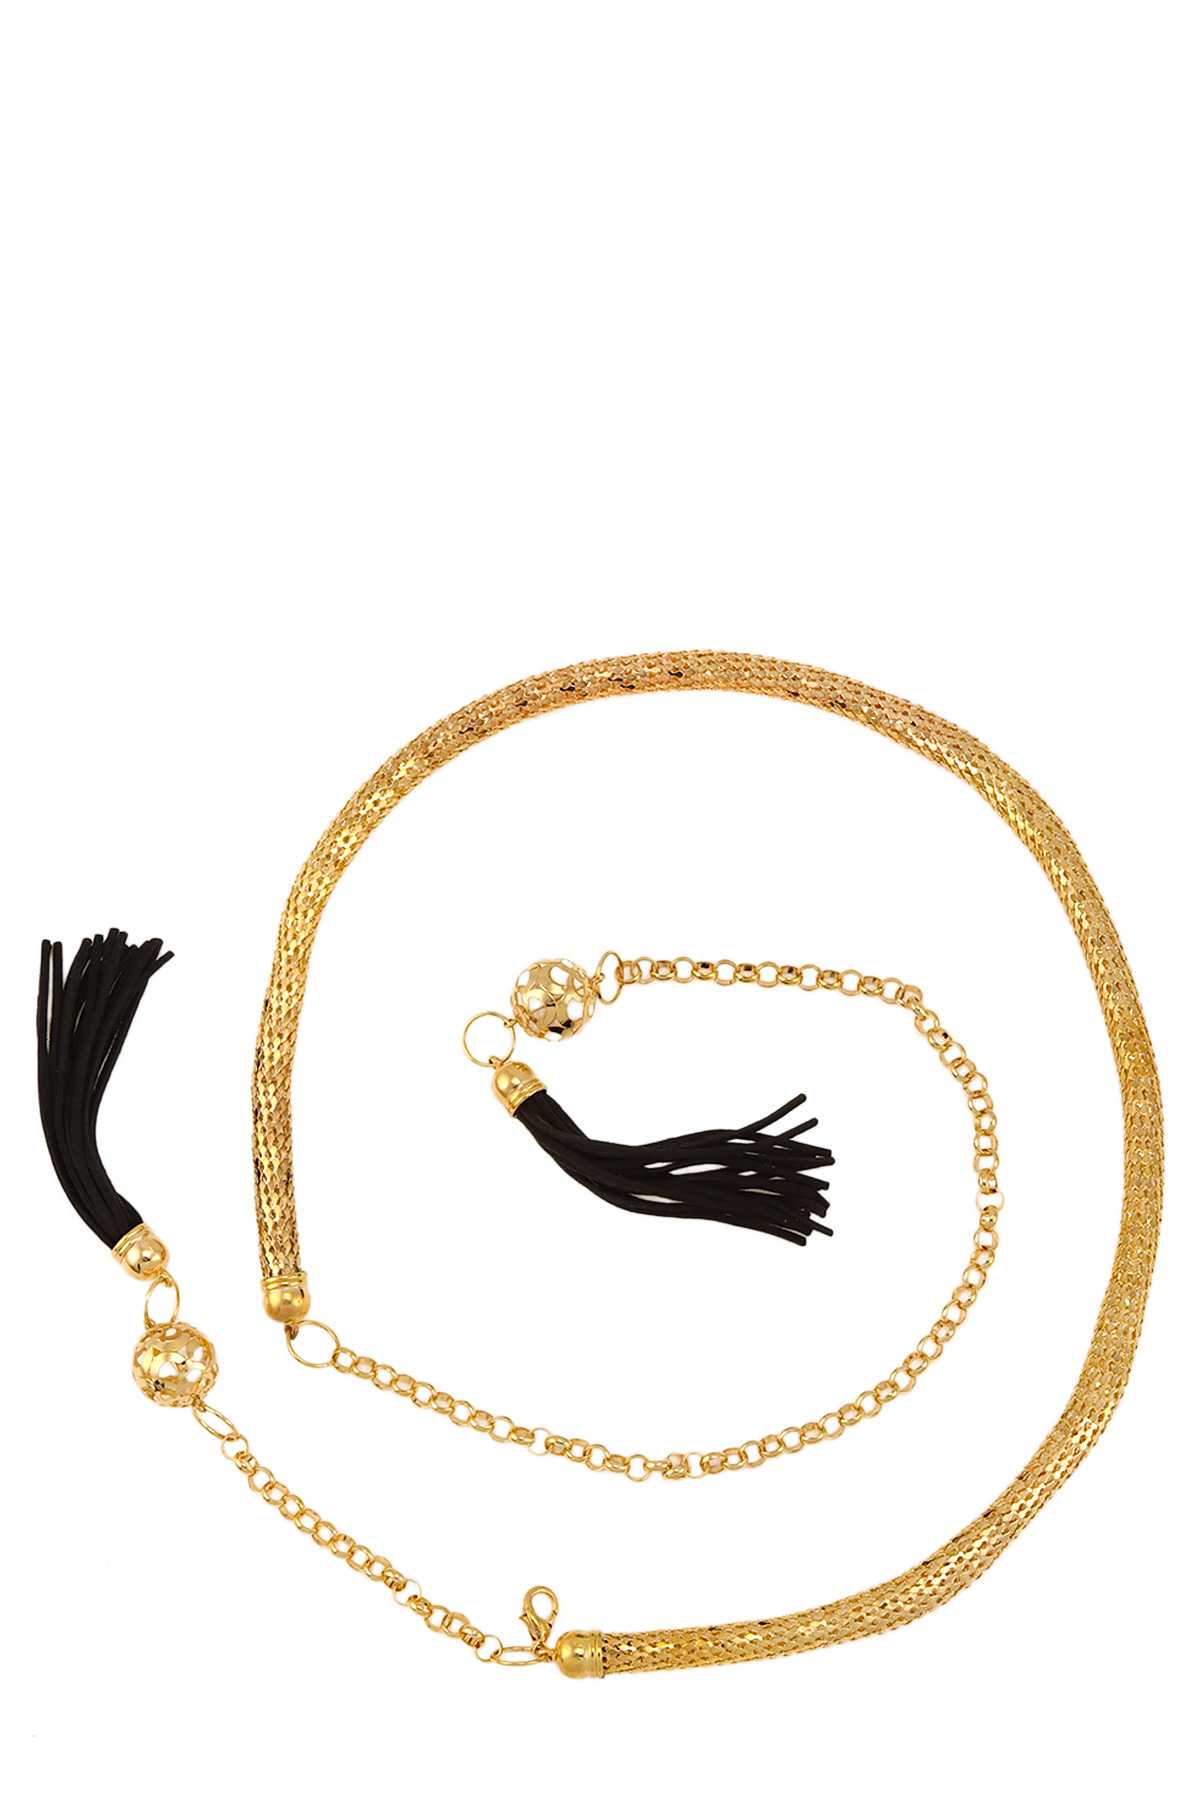 Dragon scale metal chain belt with leather tassel